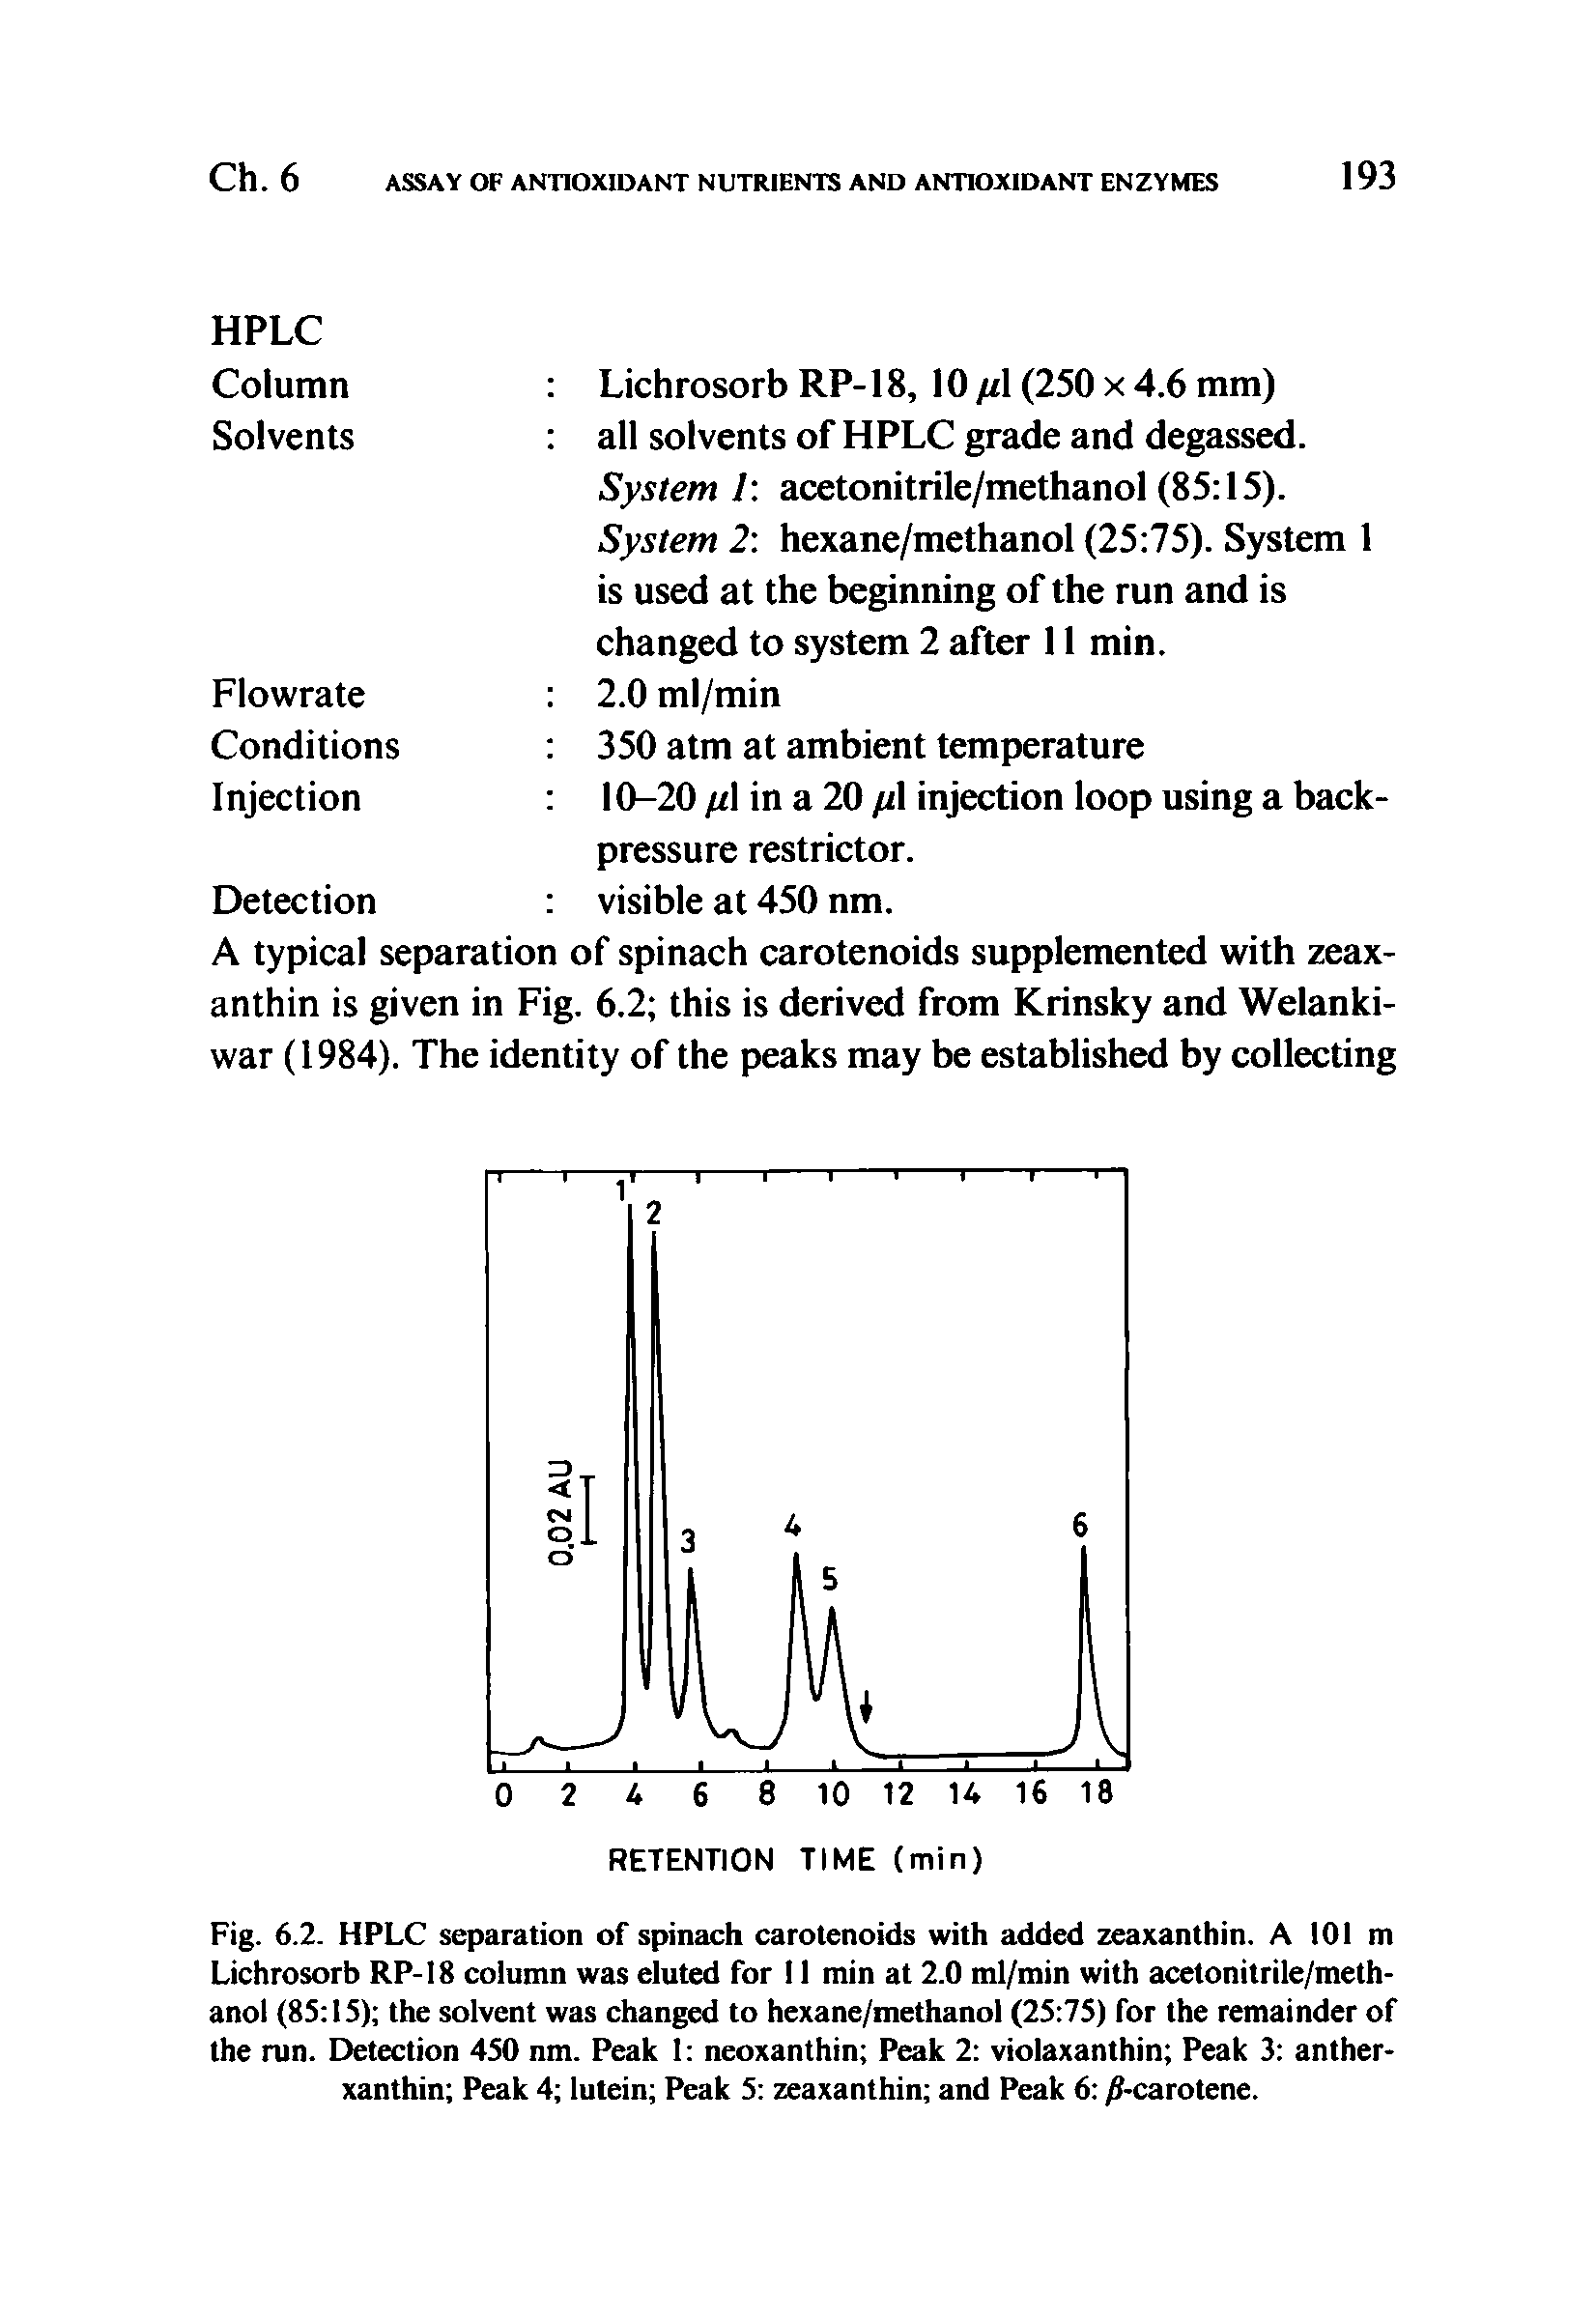 Fig. 6.2. HPLC separation of spinach carotenoids with added zeaxanthin. A 101 m Lichrosorb RP-I8 column was eluted for 11 min at 2.0 ml/min with acetonitrile/methanol (85 15) the solvent was changed to hexane/methanol (25 75) for the remainder of the run. Detection 450 nm. Peak 1 neoxanthin Peak 2 violaxanthin Peak 3 anther-xanthin Peak 4 lutein Peak 5 zeaxanthin and Peak 6 /7-carotene.